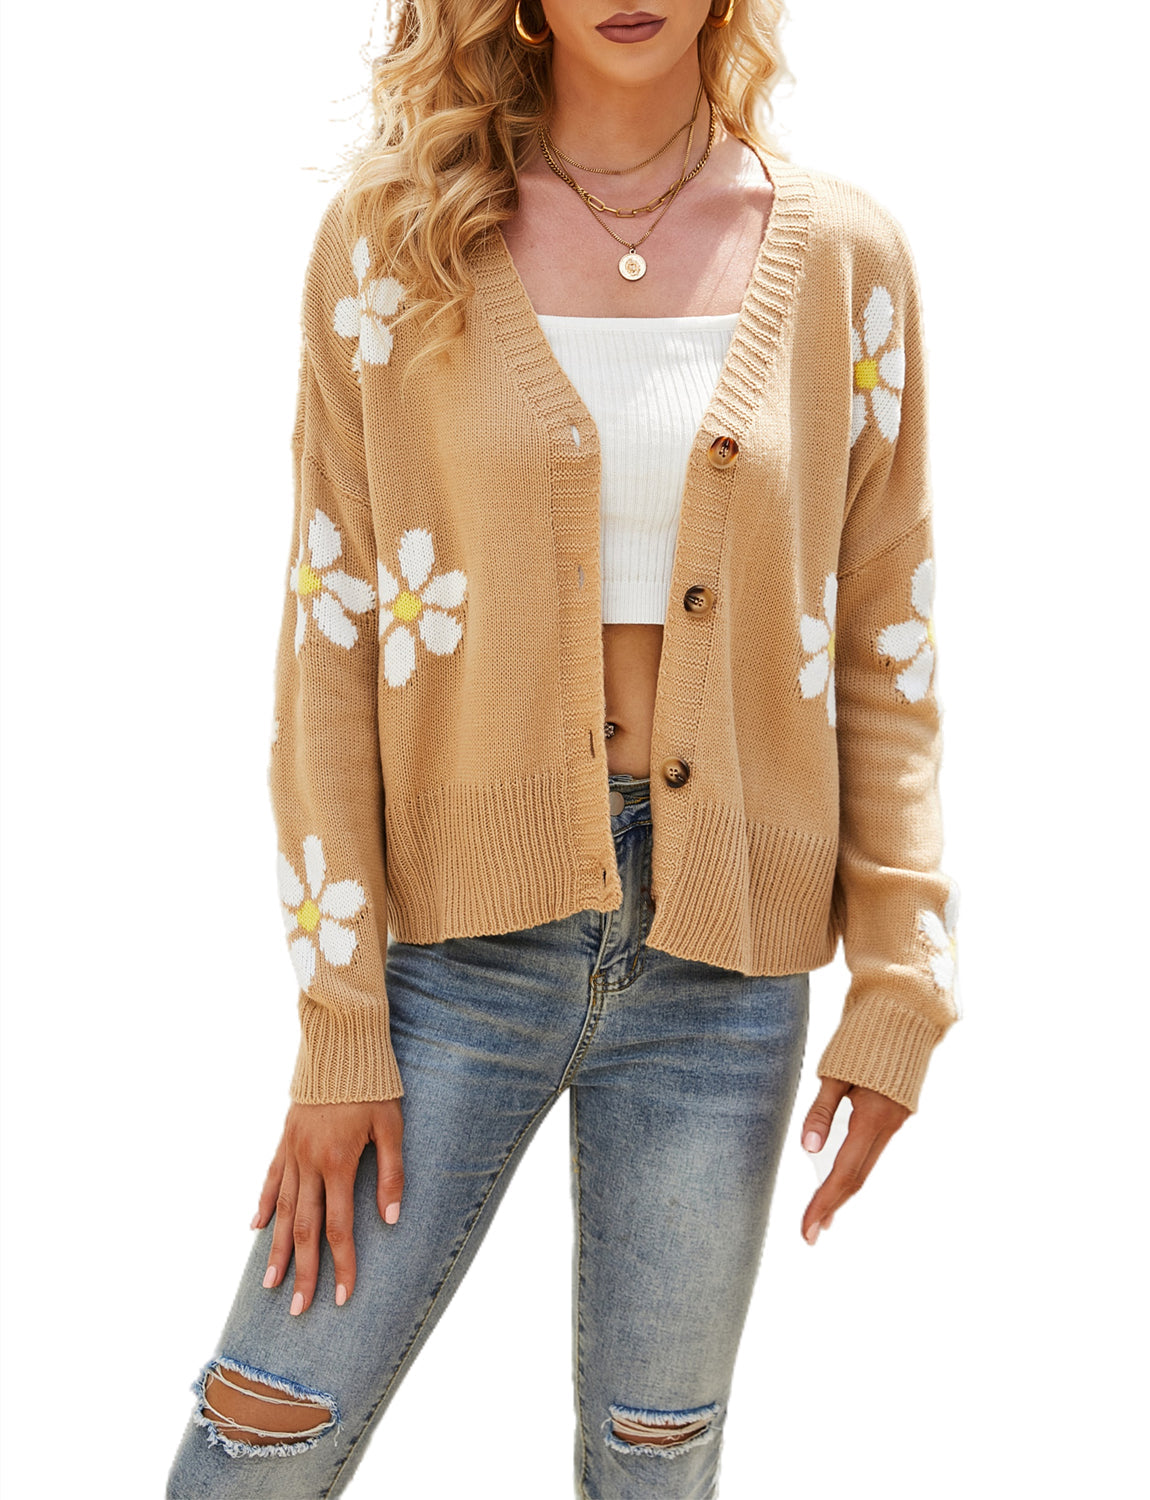 Women's Short Floral Cardigan Sweater Loose Cozy Casual Long Sleeve Top